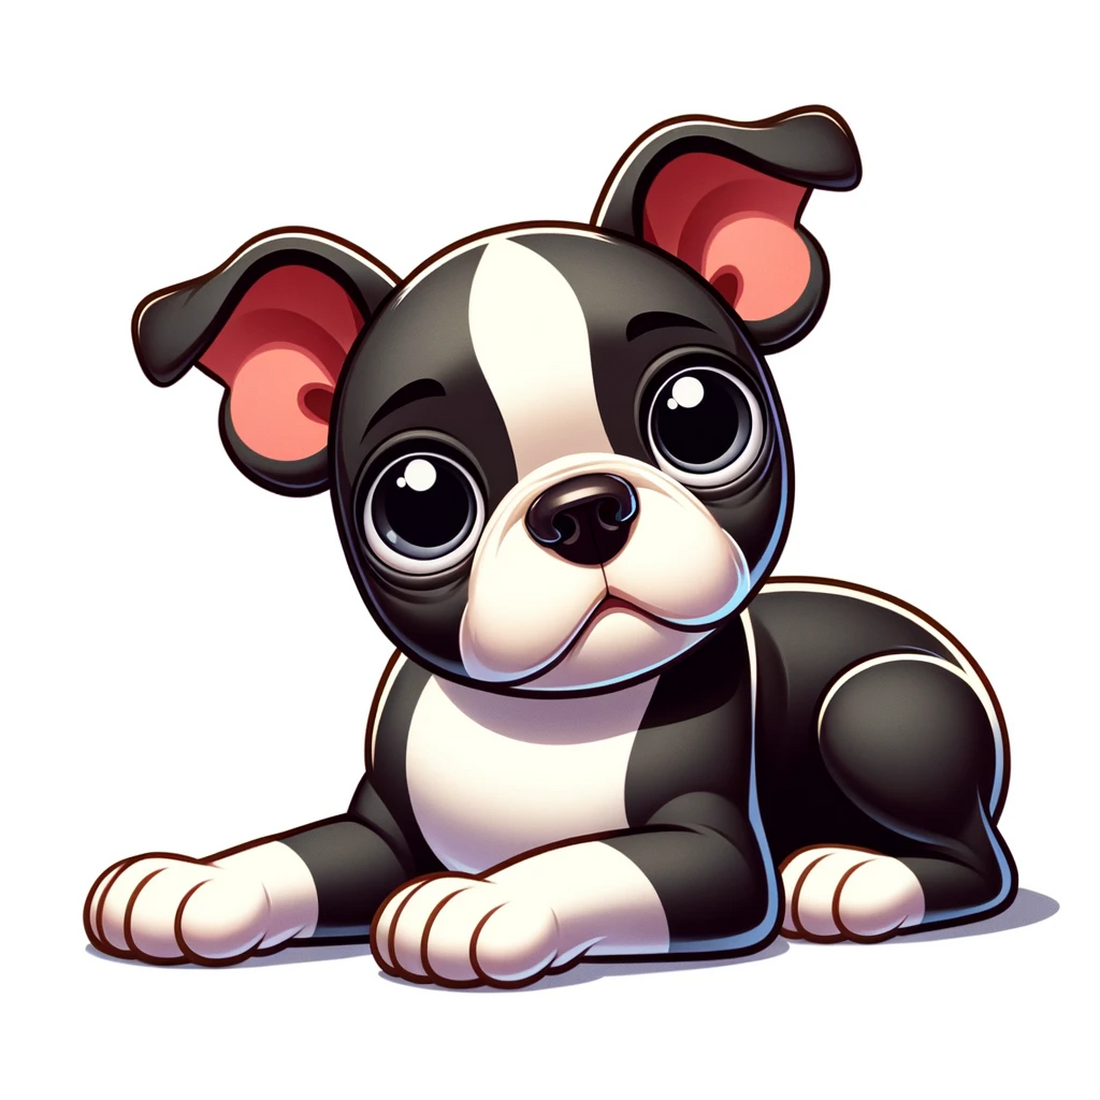 AI art of a black and white puppy, in a cartoon style